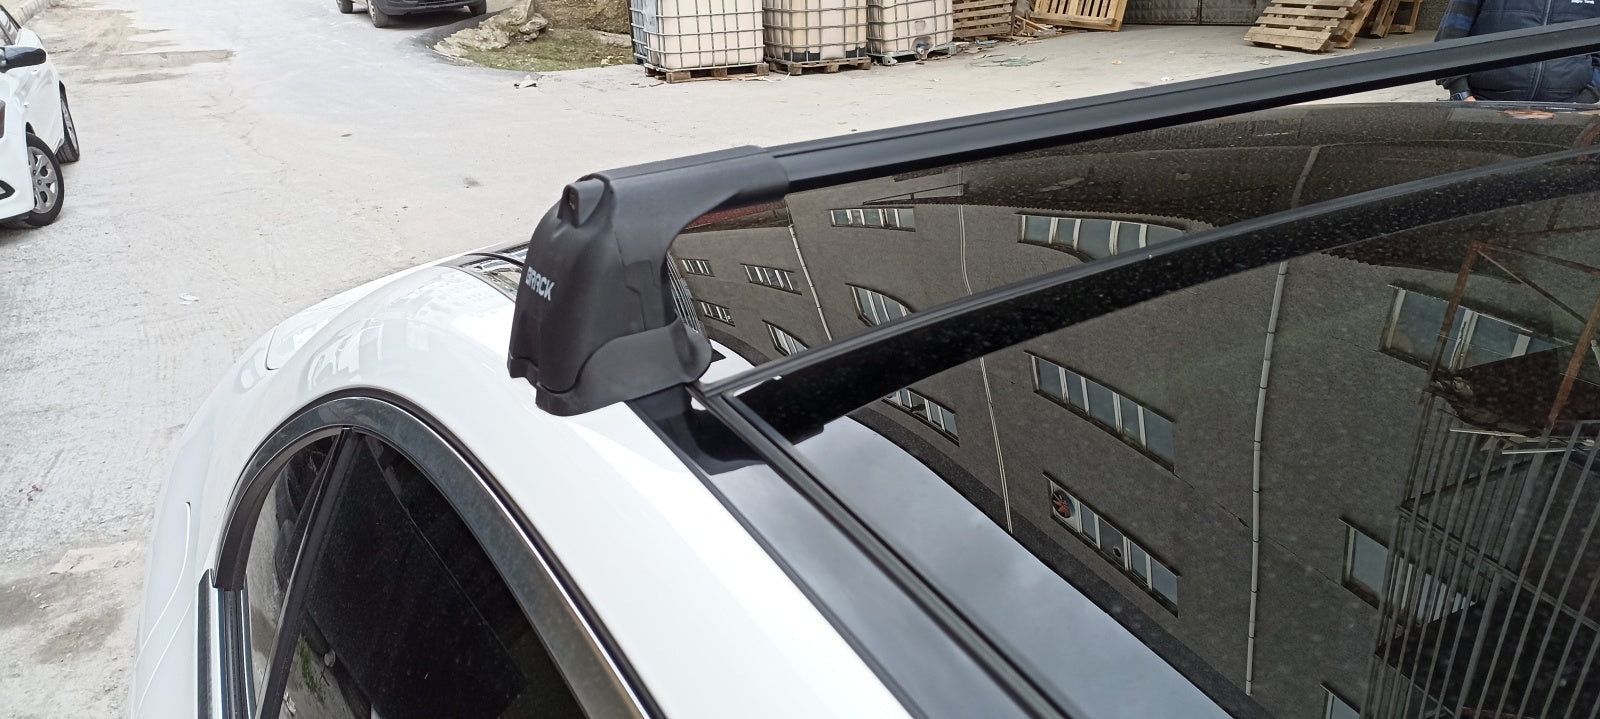 For Mercedes E Series W213 2016-Up Roof Rack System Carrier Cross Bars Aluminum Lockable High Quality of Metal Bracket Silver